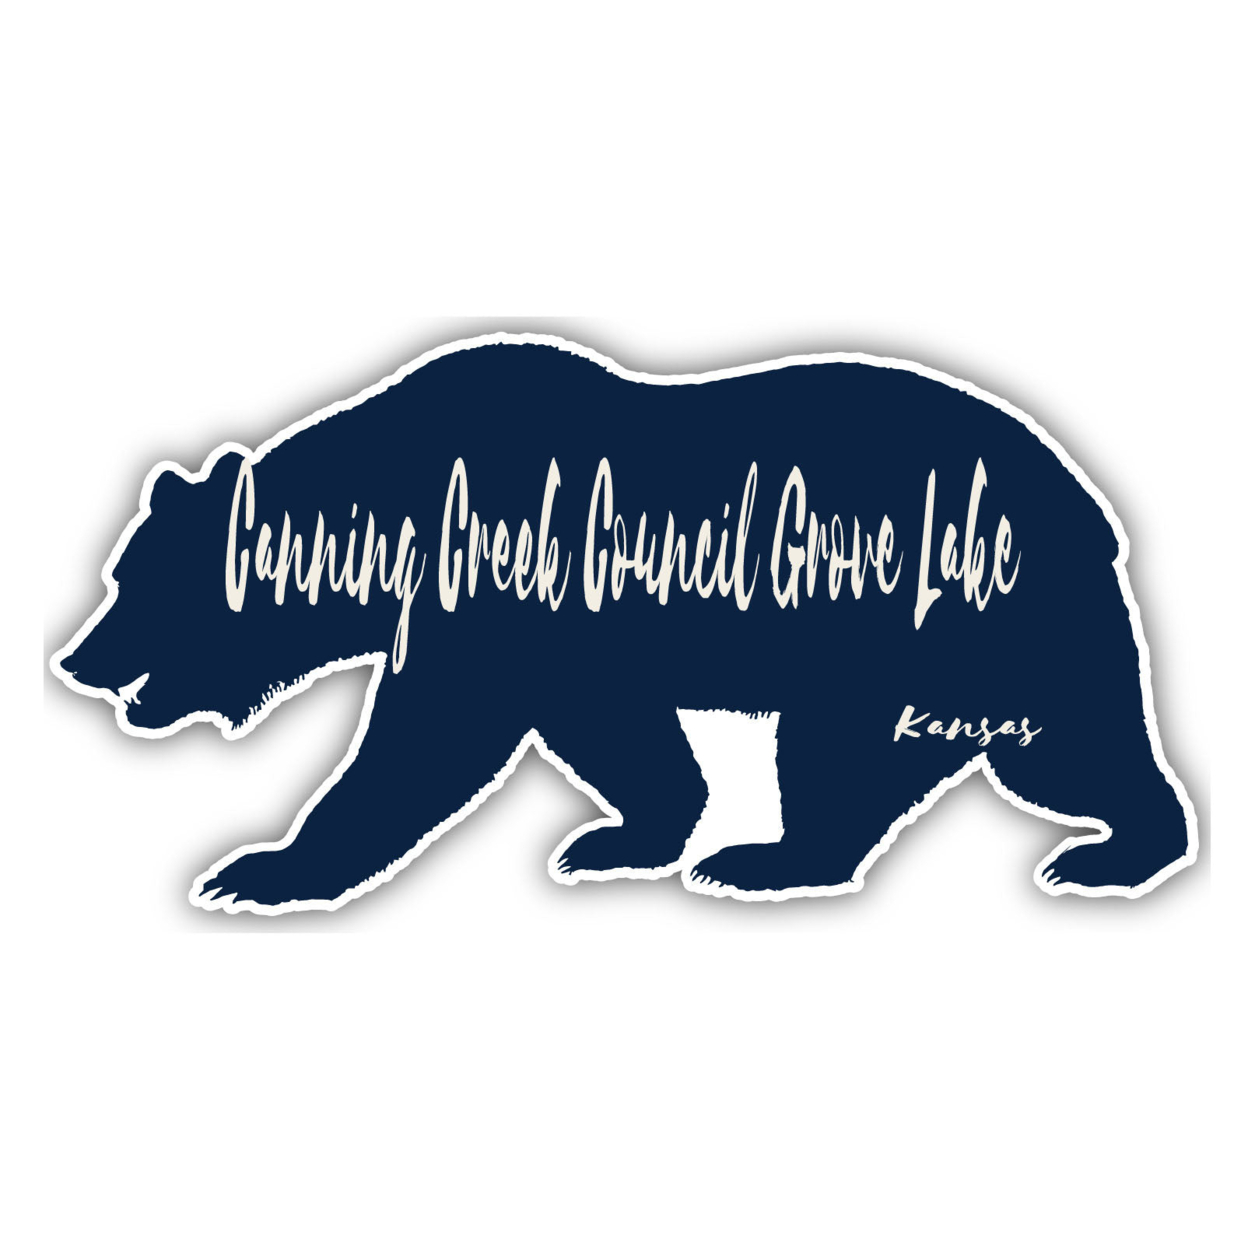 Canning Creek Council Grove Lake Kansas Souvenir Decorative Stickers (Choose Theme And Size) - 4-Pack, 8-Inch, Bear